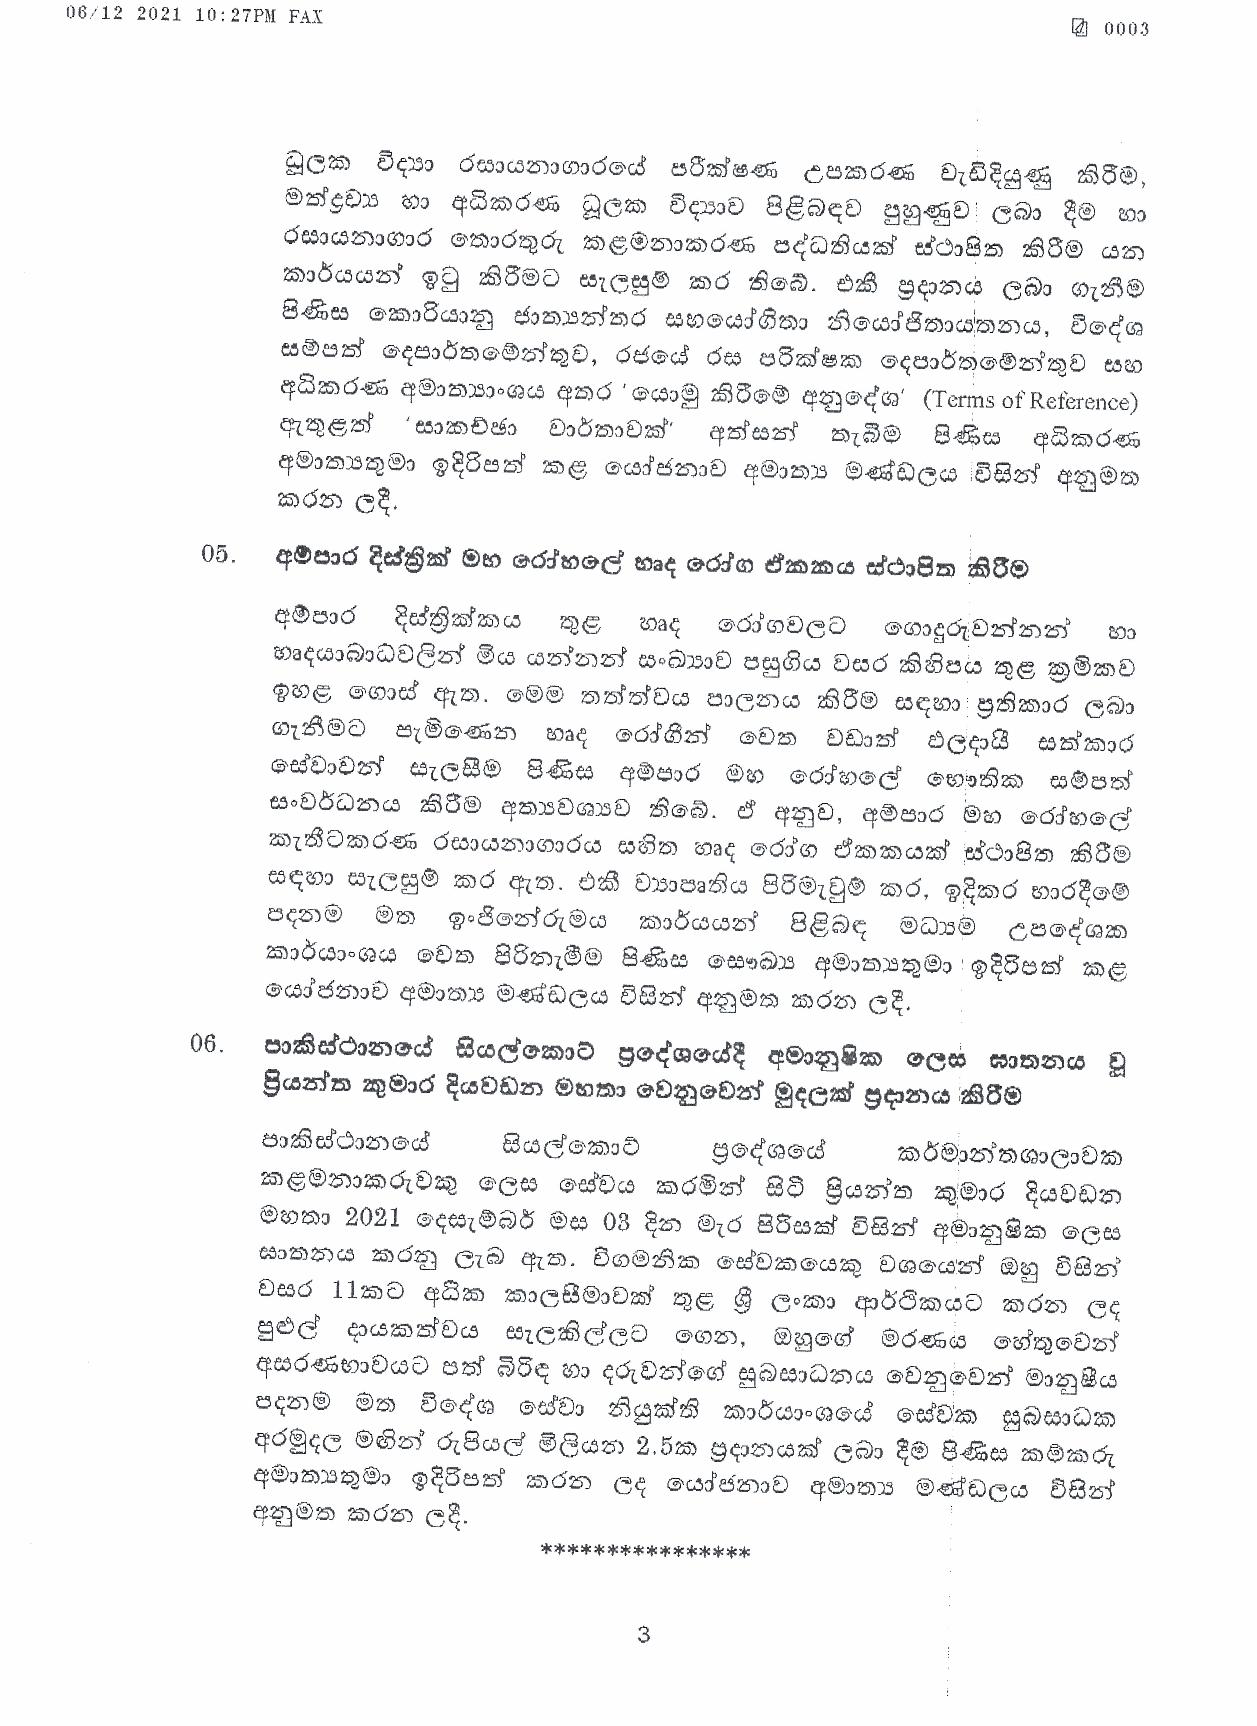 Cabinet Decision on 06.12.2021 page 001